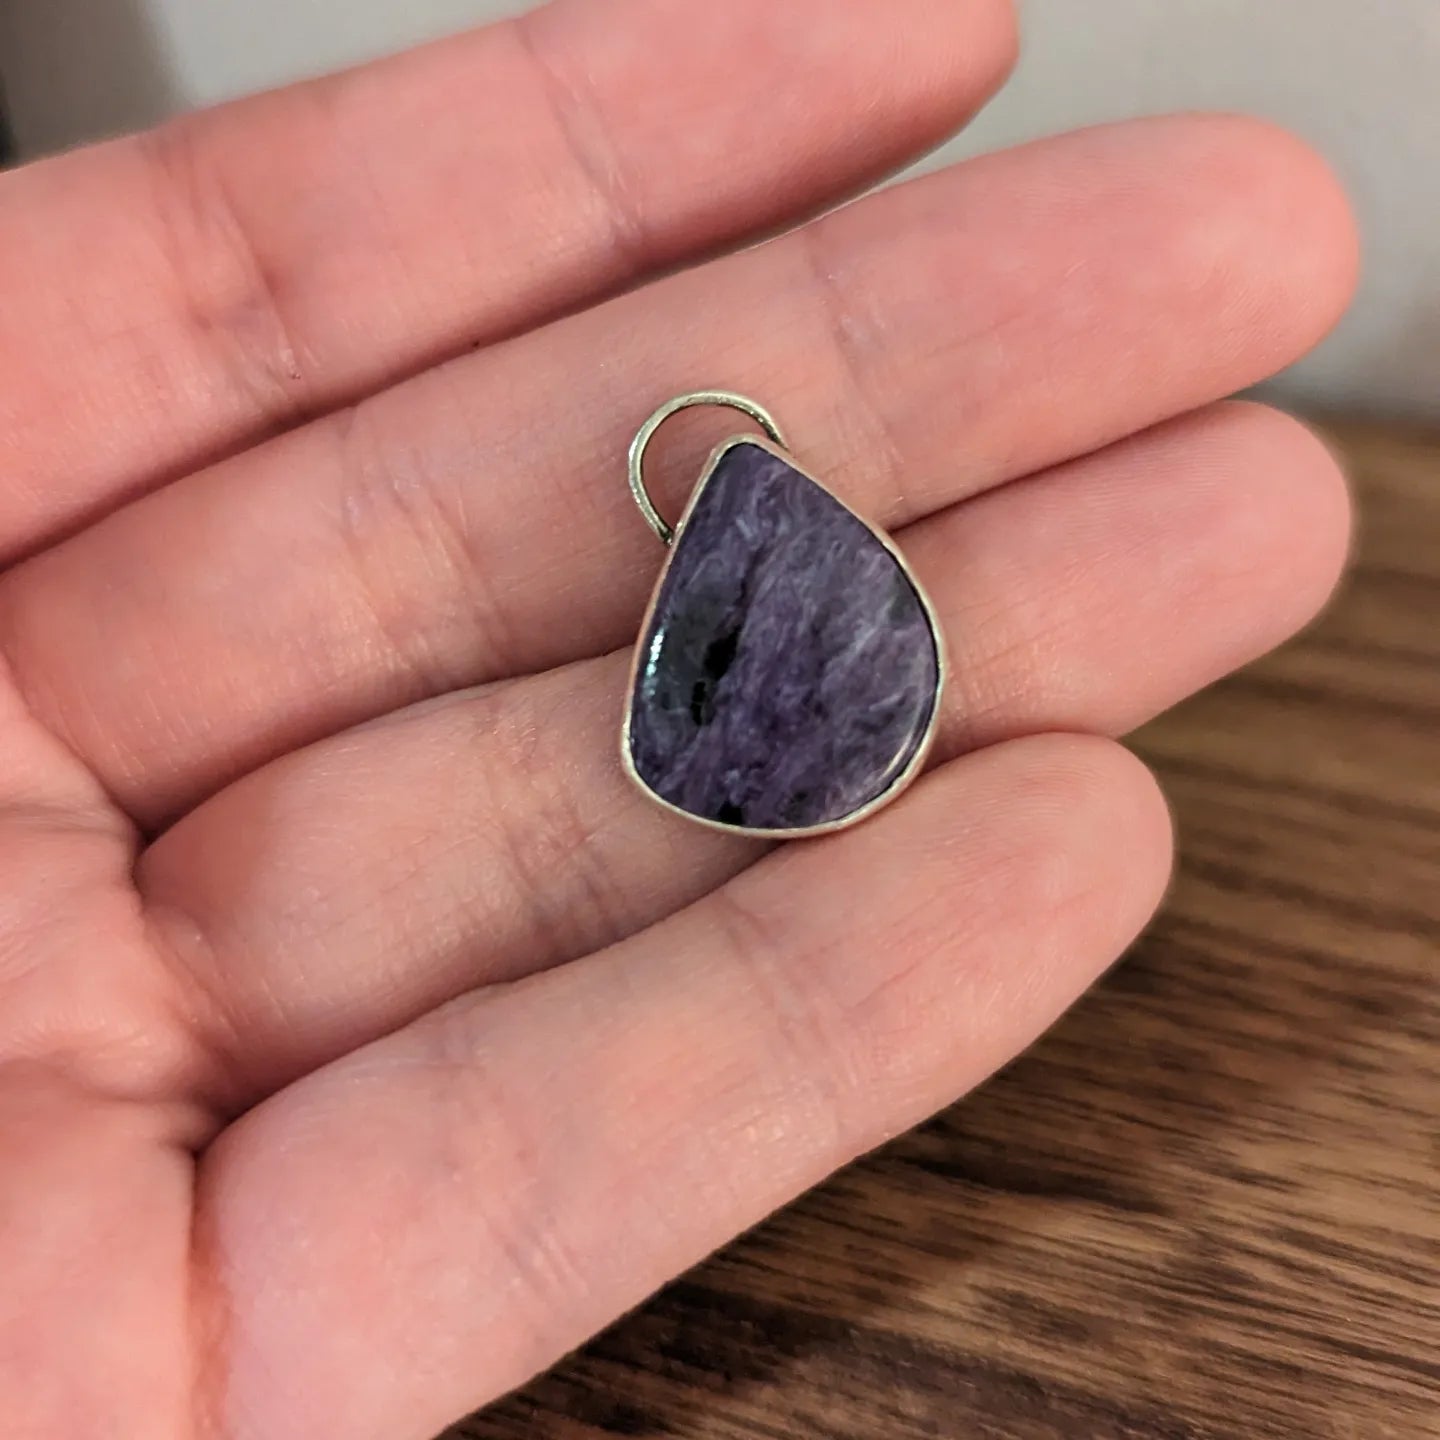 Aras' hand holds a silver pendant with a solitary purple swirling charoite stone in an almost teardrop shape with one flat side.